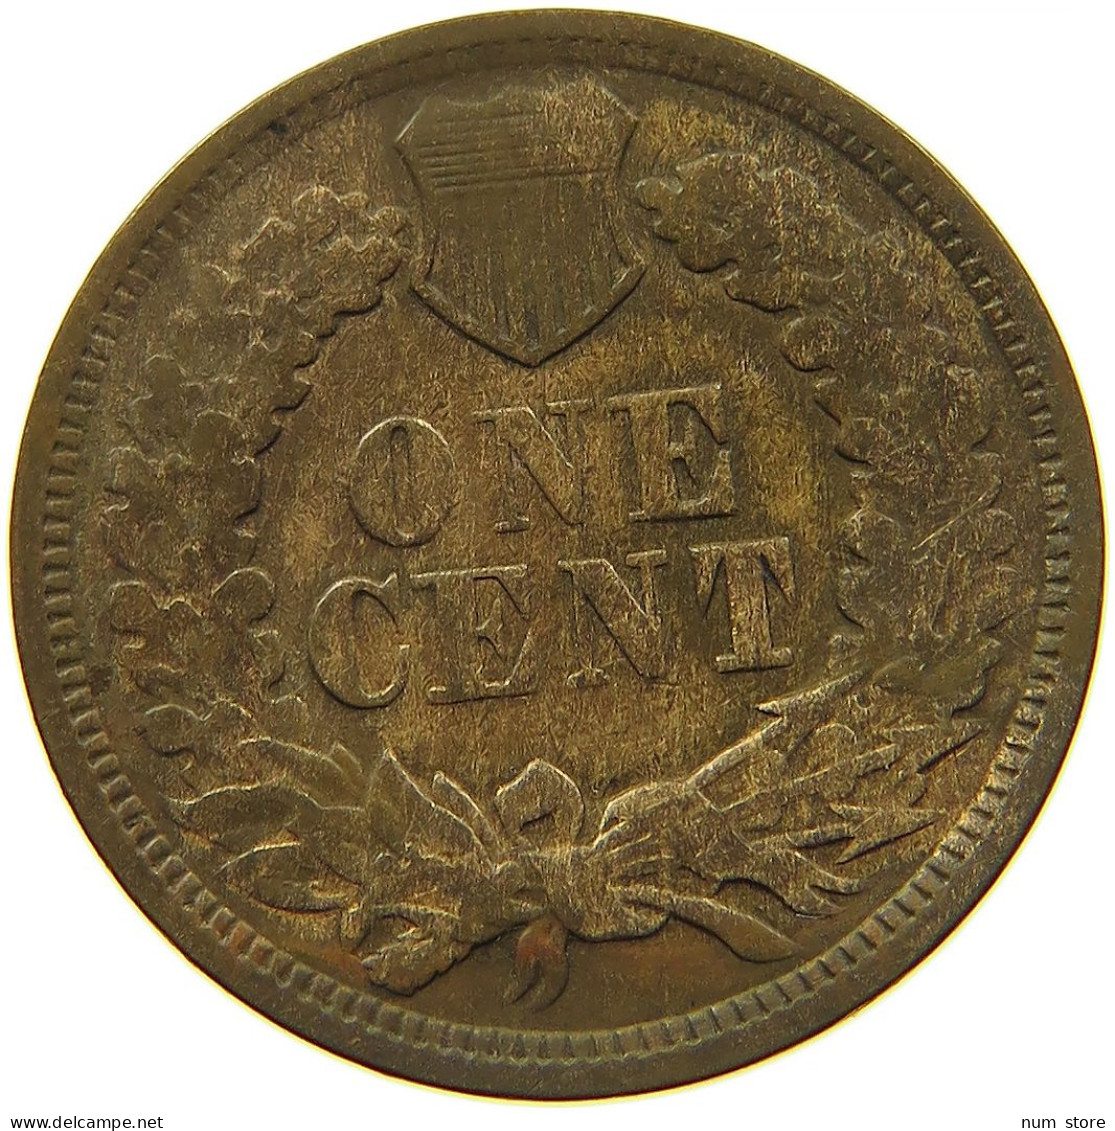 UNITED STATES OF AMERICA CENT 1870 INDIAN HEAD #t027 0475 - 1859-1909: Indian Head